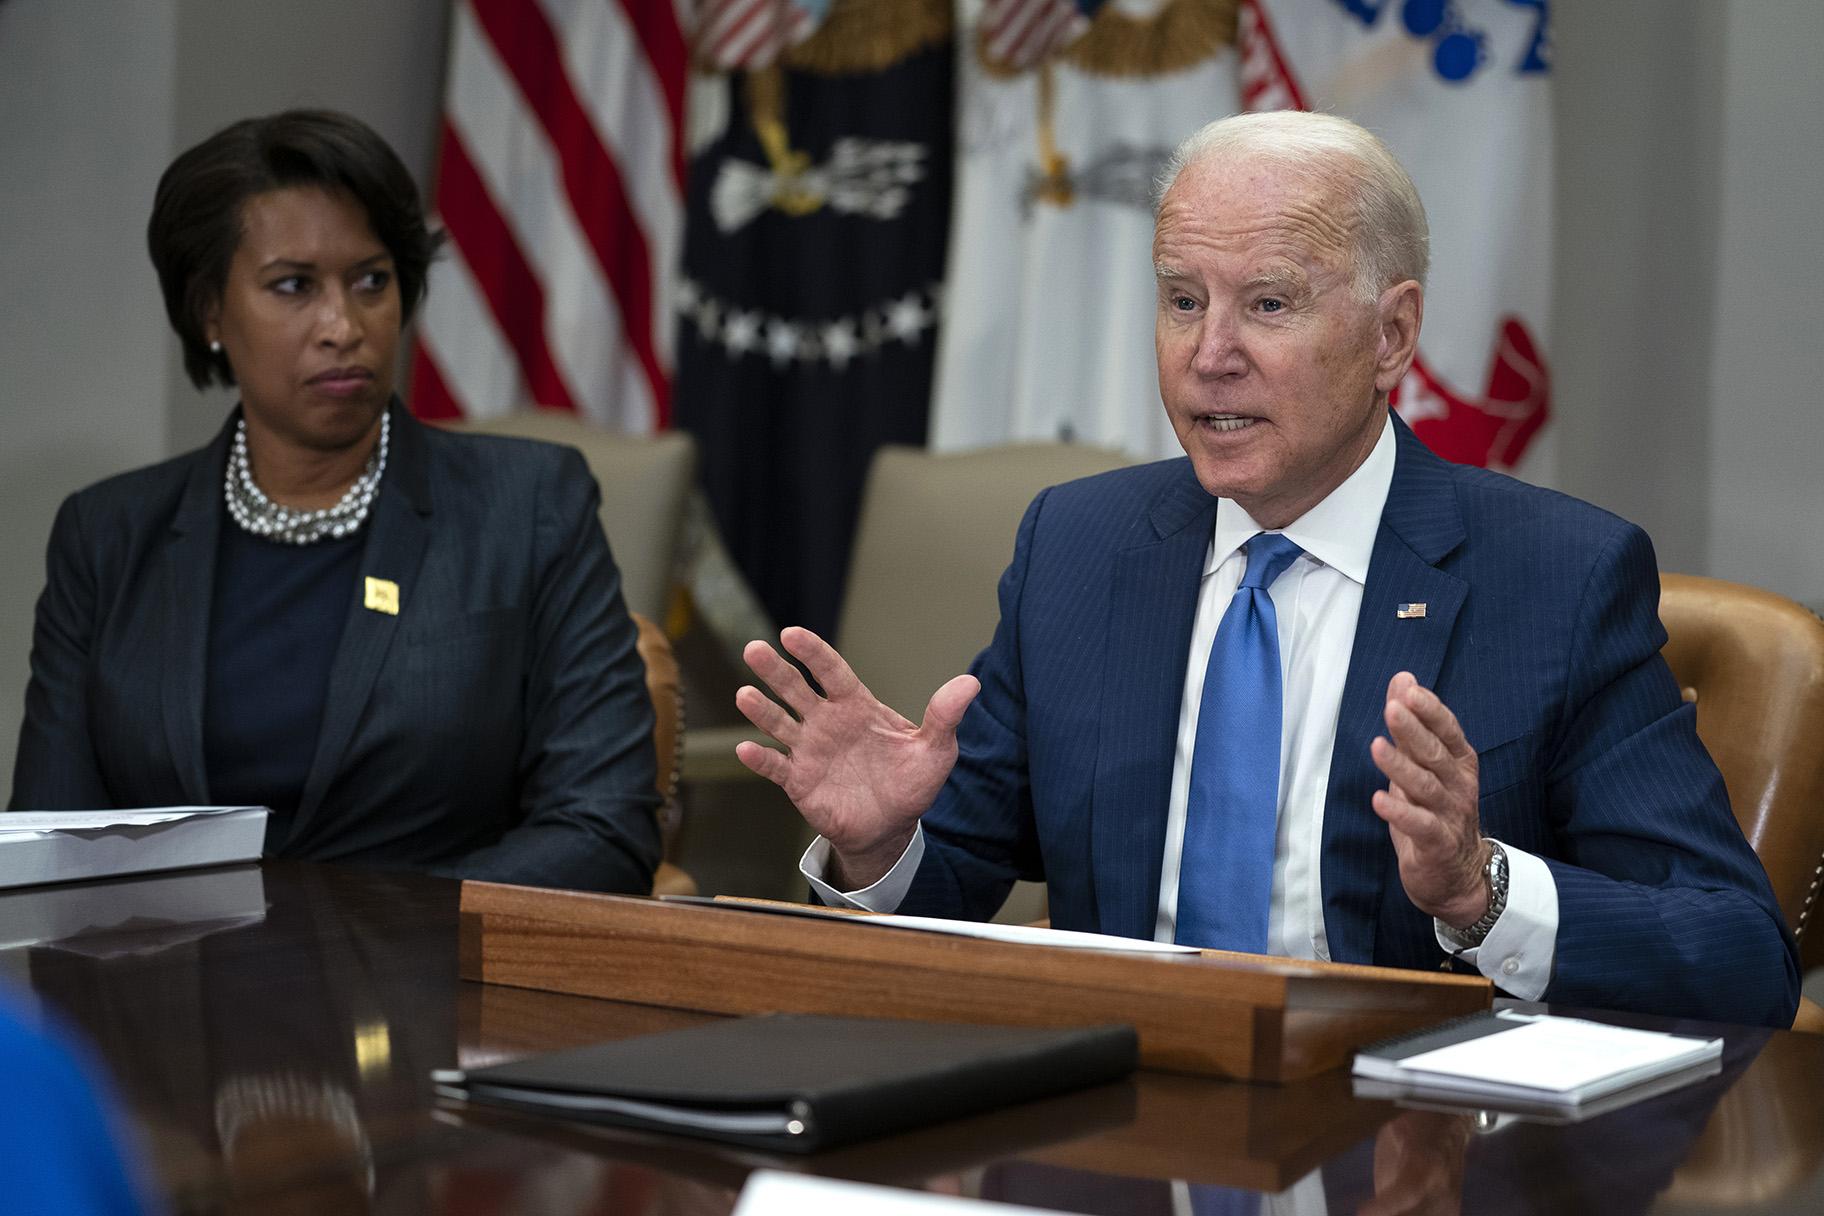 Washington Mayor Muriel Bowser listens as President Joe Biden speaks during a meeting on reducing gun violence, in the Roosevelt Room of the White House, Monday, July 12, 2021, in Washington. (AP Photo / Evan Vucci)